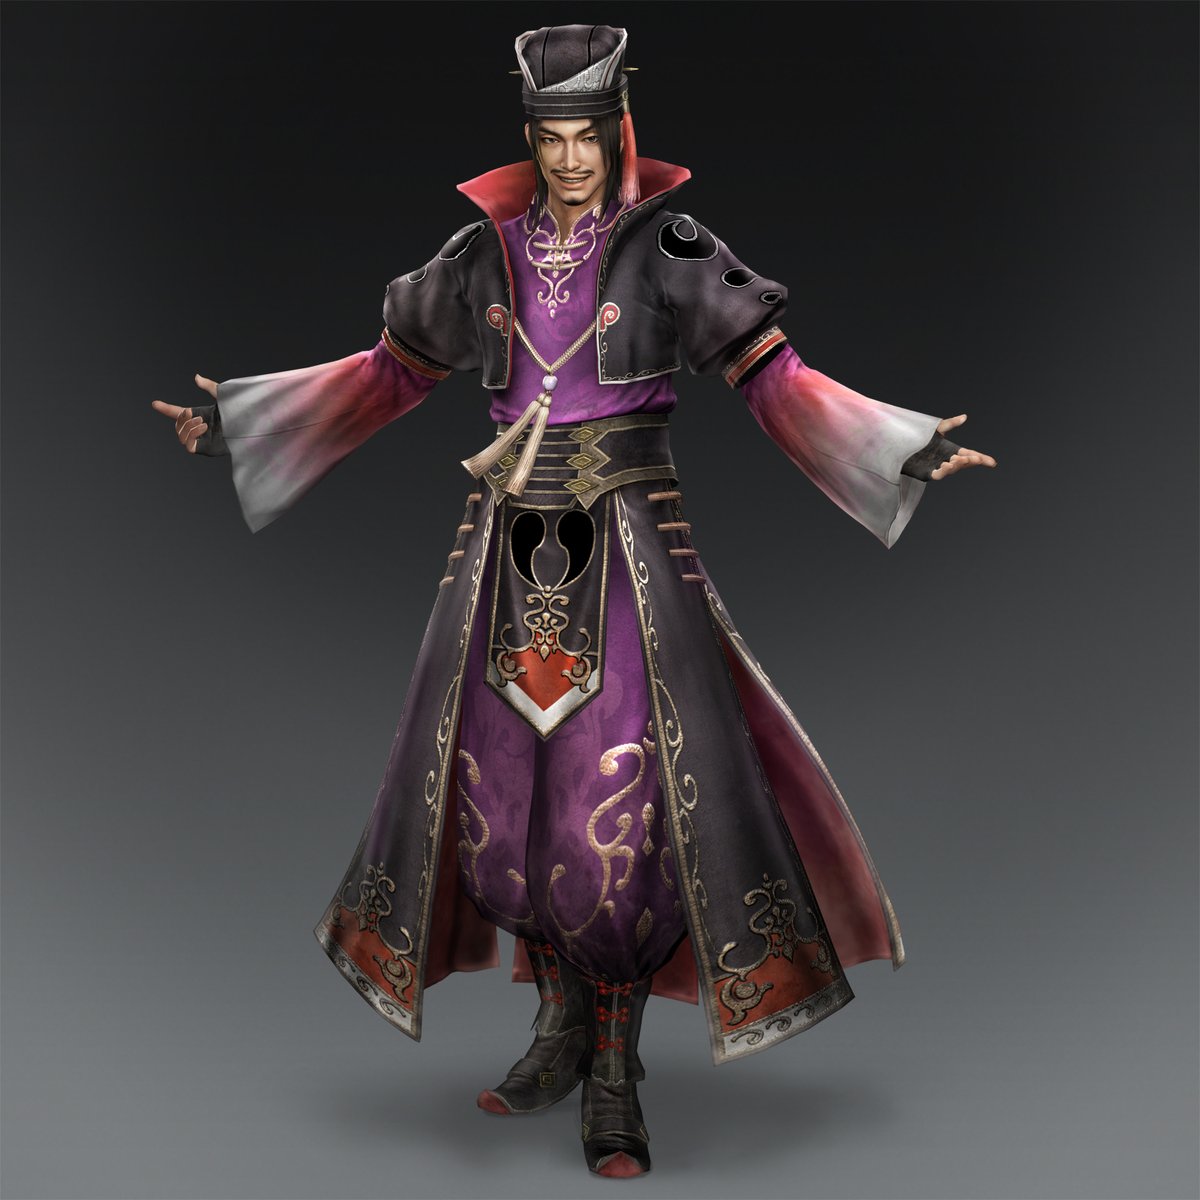 Chen Gongslimy little weasel man. Used to be under Cao Cao but then goes HMMMM LU BU STRONK and joins him instead, to which Cao Cao is kind of like... ok...very fun to hit enemies on the head with a bamboo scroll.